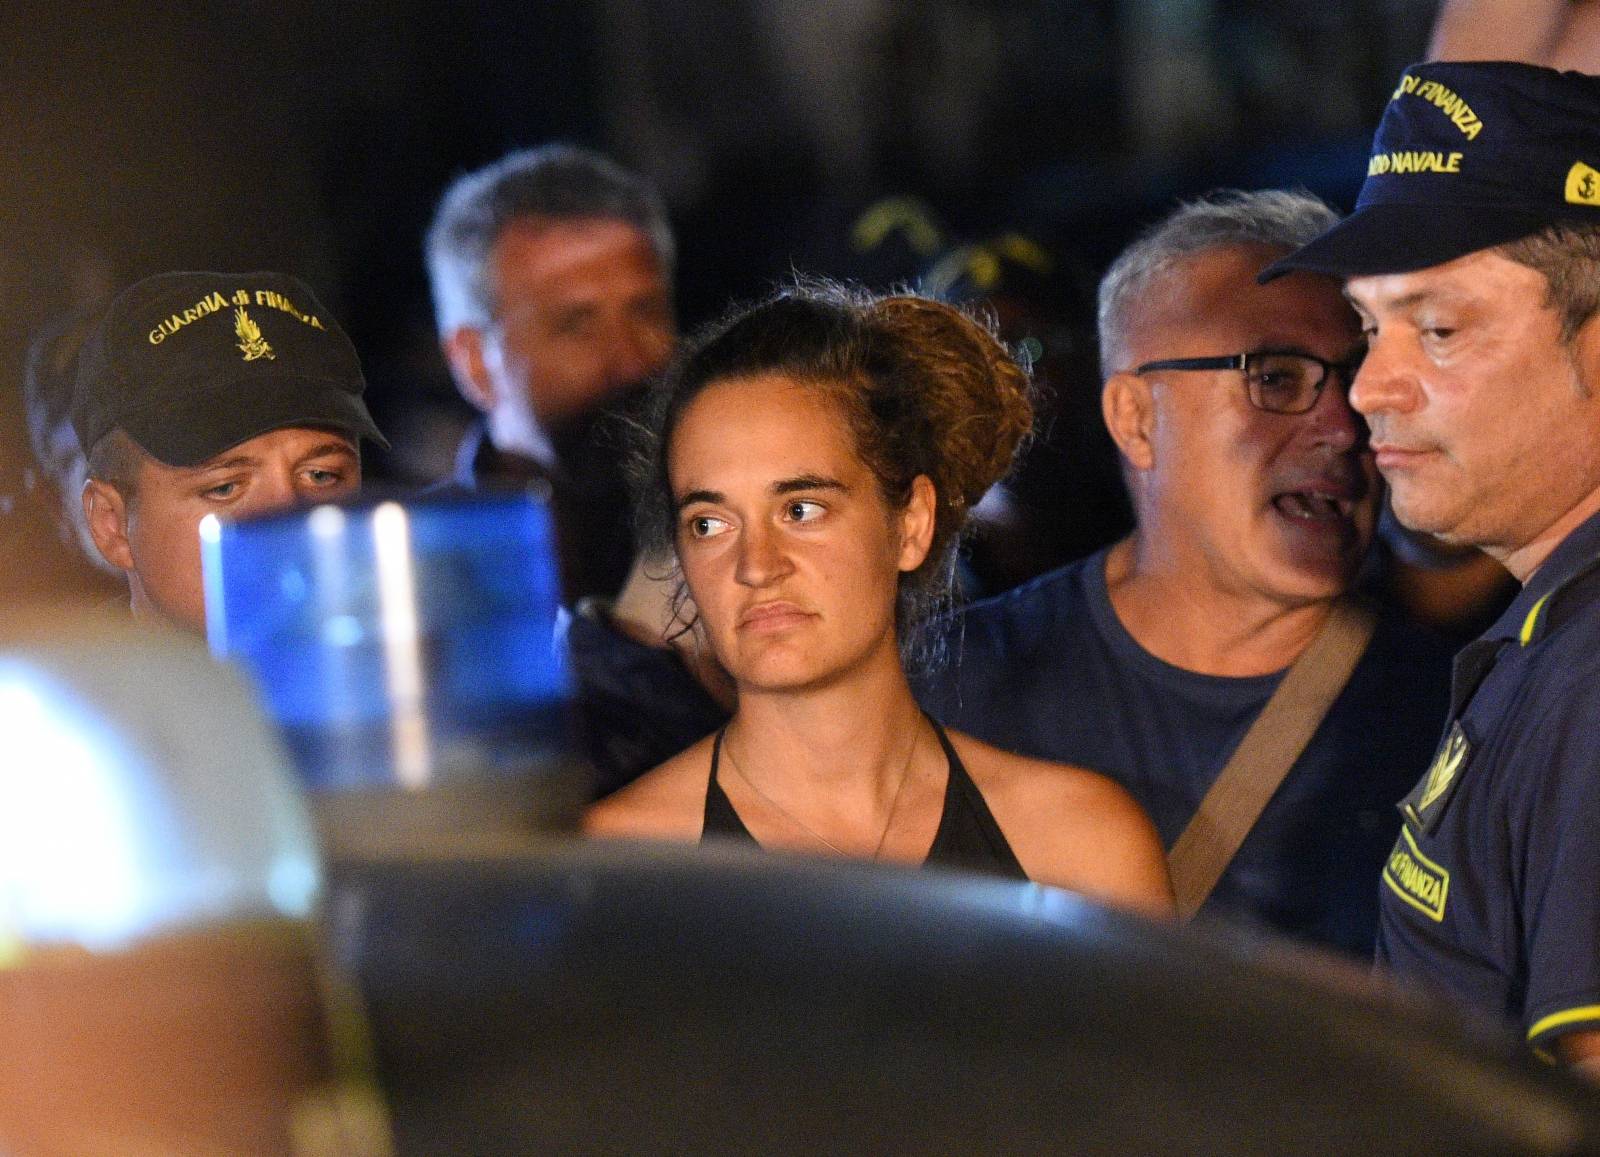 Carola Rackete, the 31-year-old Sea-Watch 3 captain, is escorted off the ship by police and taken away for questioning, in Lampedusa